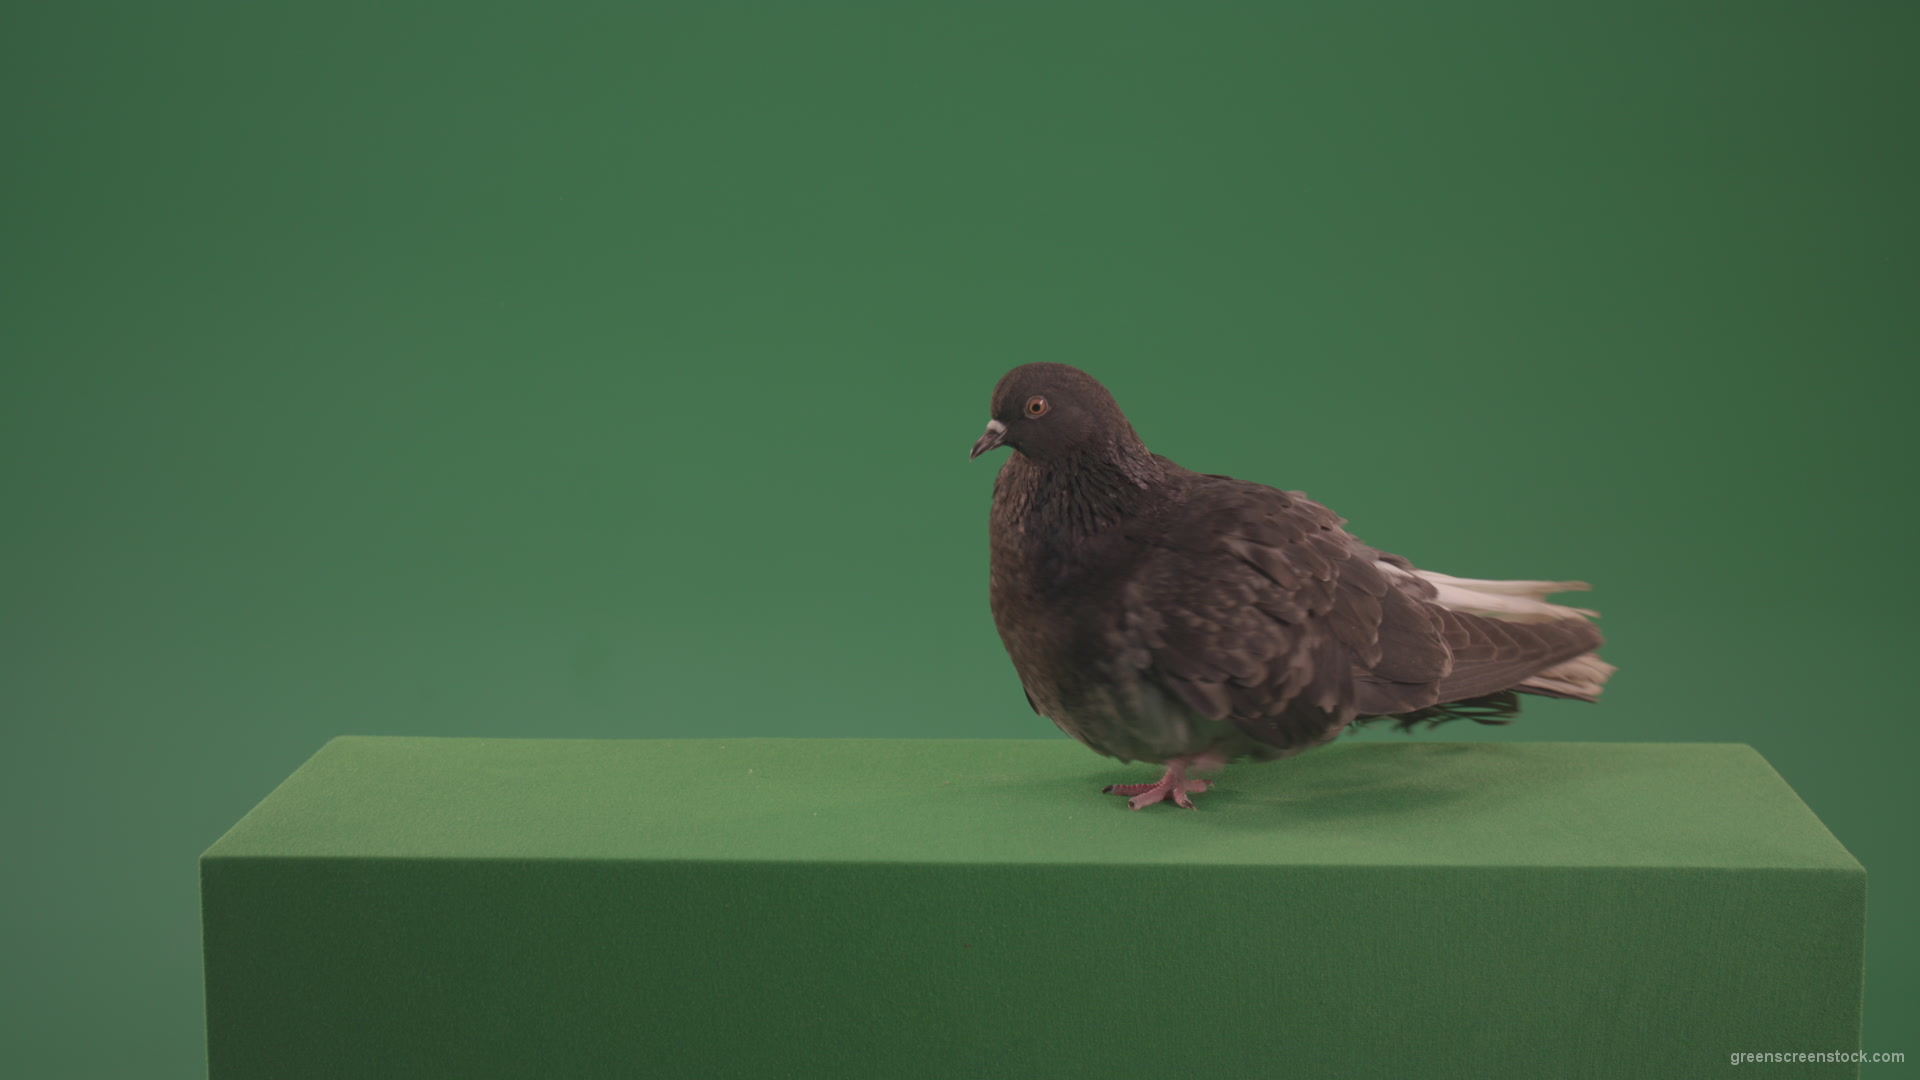 Bird-landed-and-inspected-the-territory-isolated-on-chromakey-background_009 Green Screen Stock